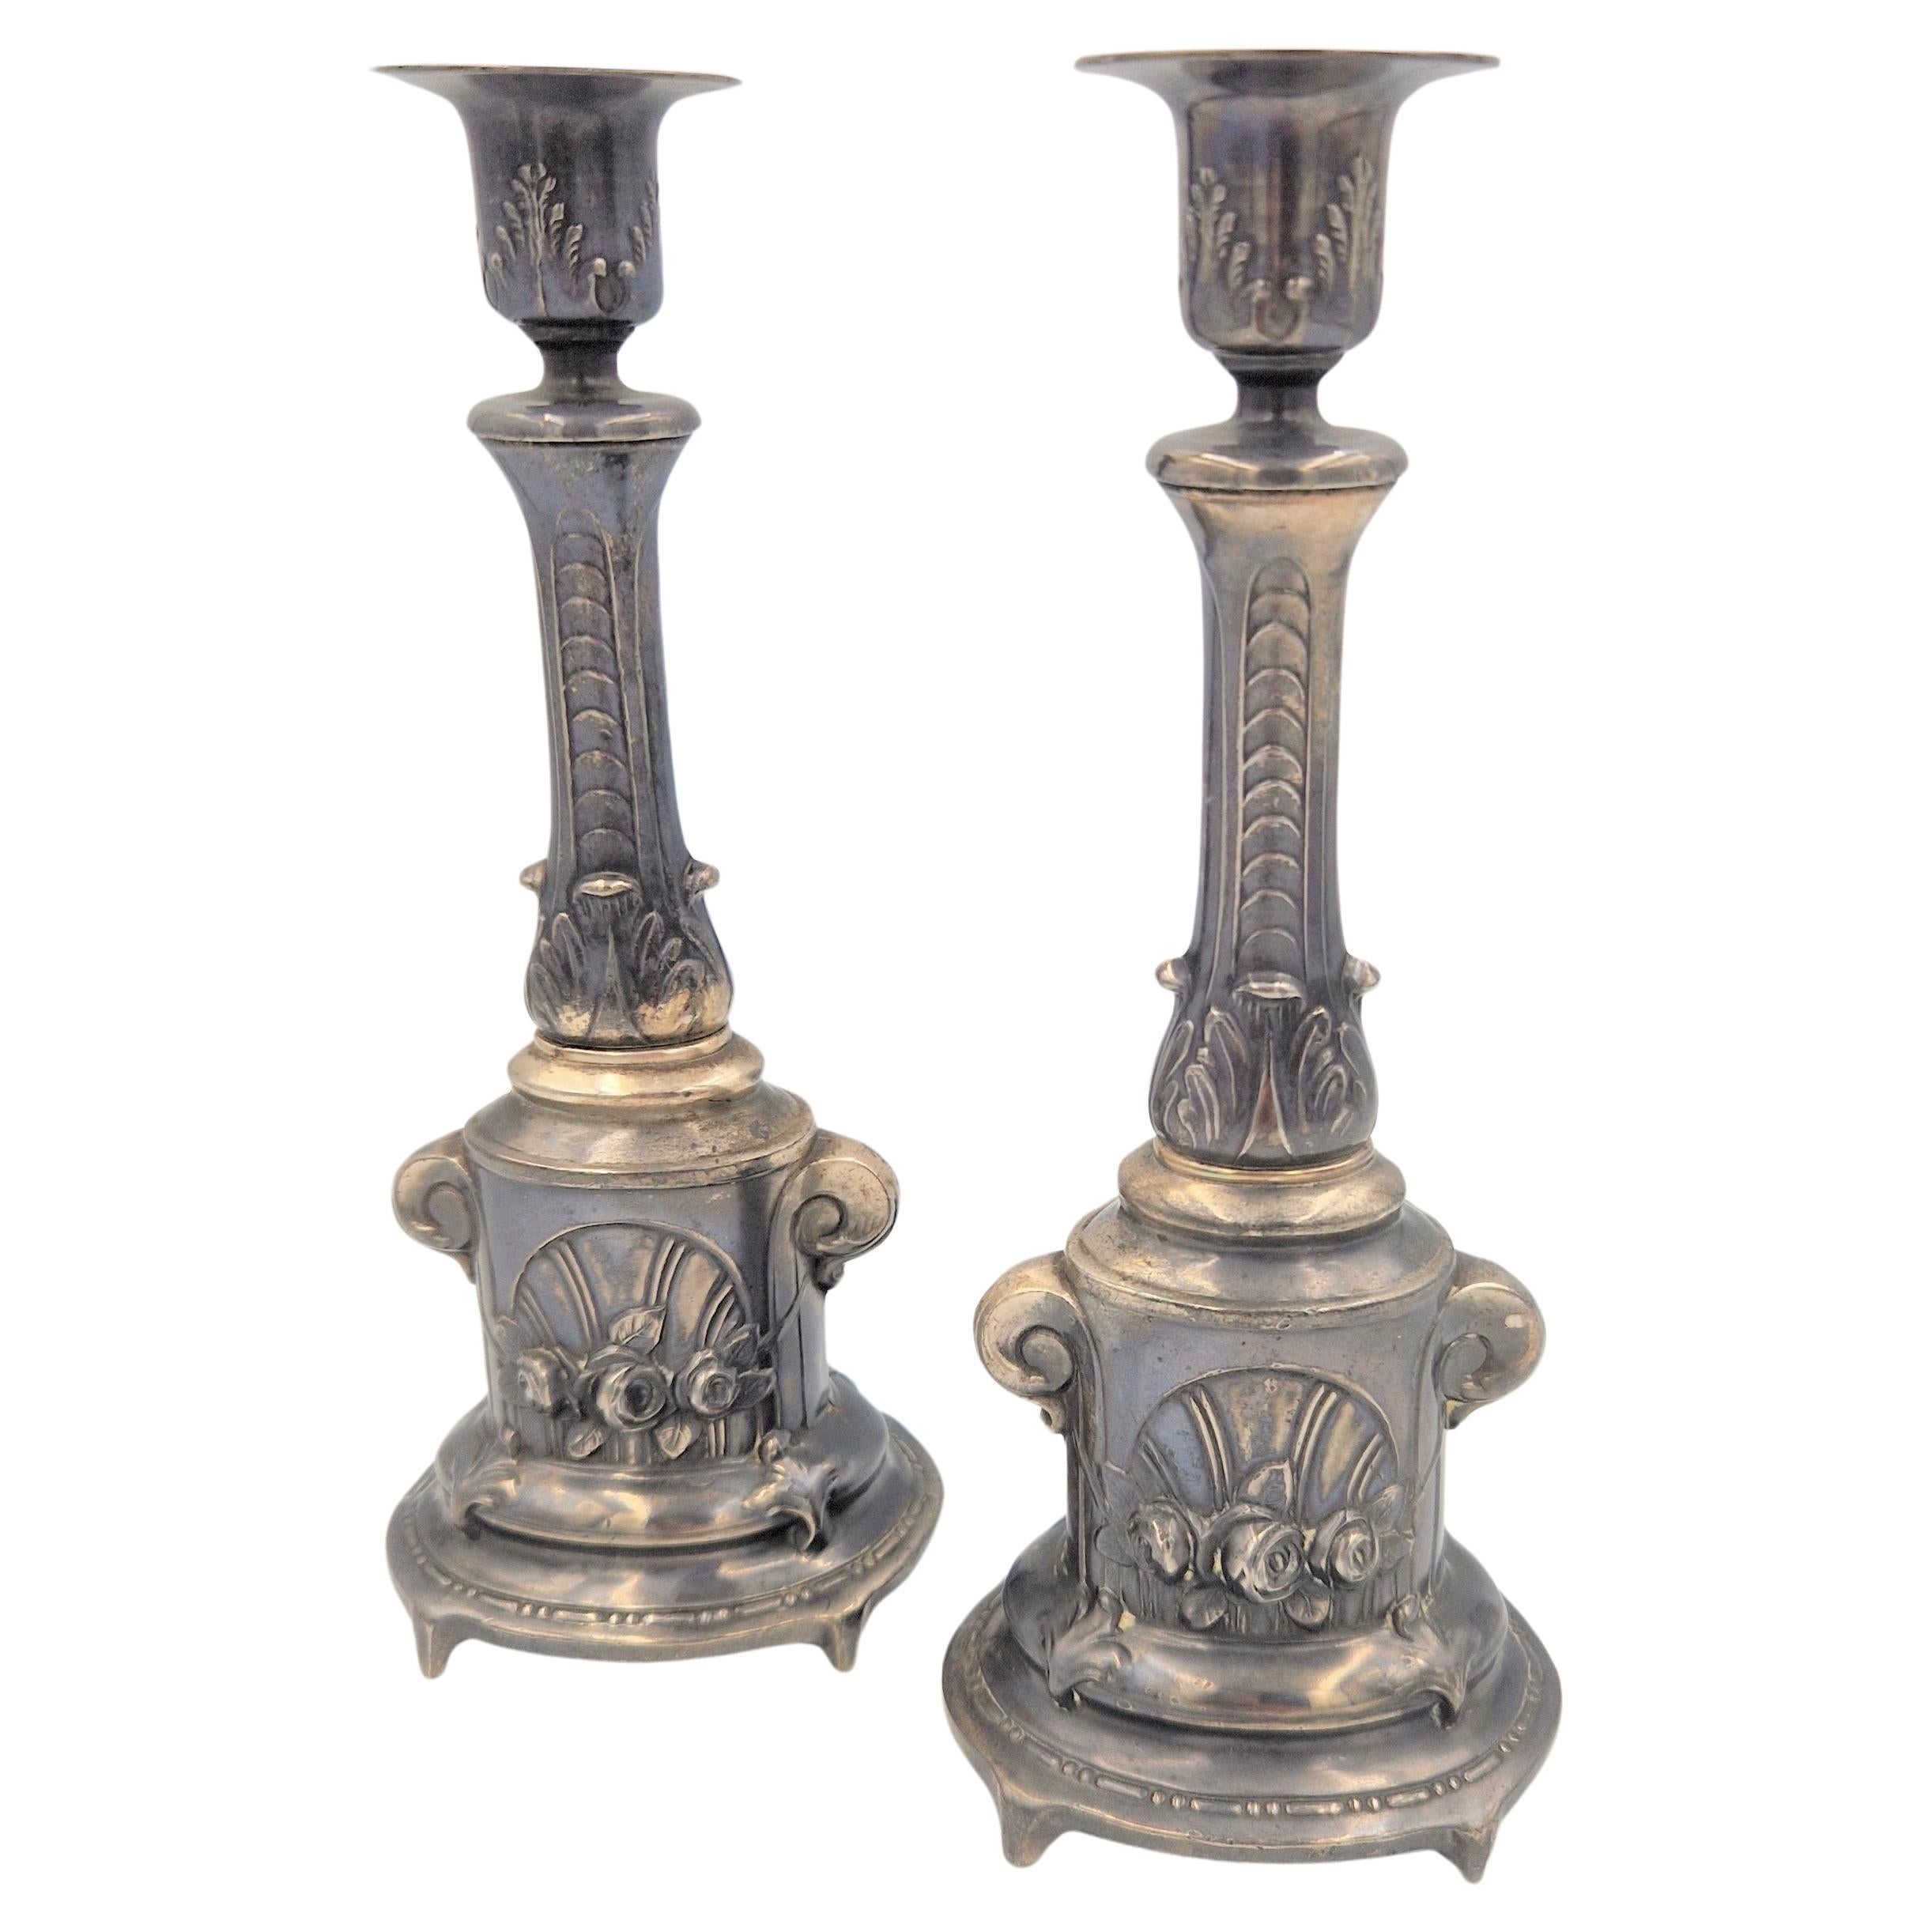 Two historicism silver plated candle stand. 1850 - 1880